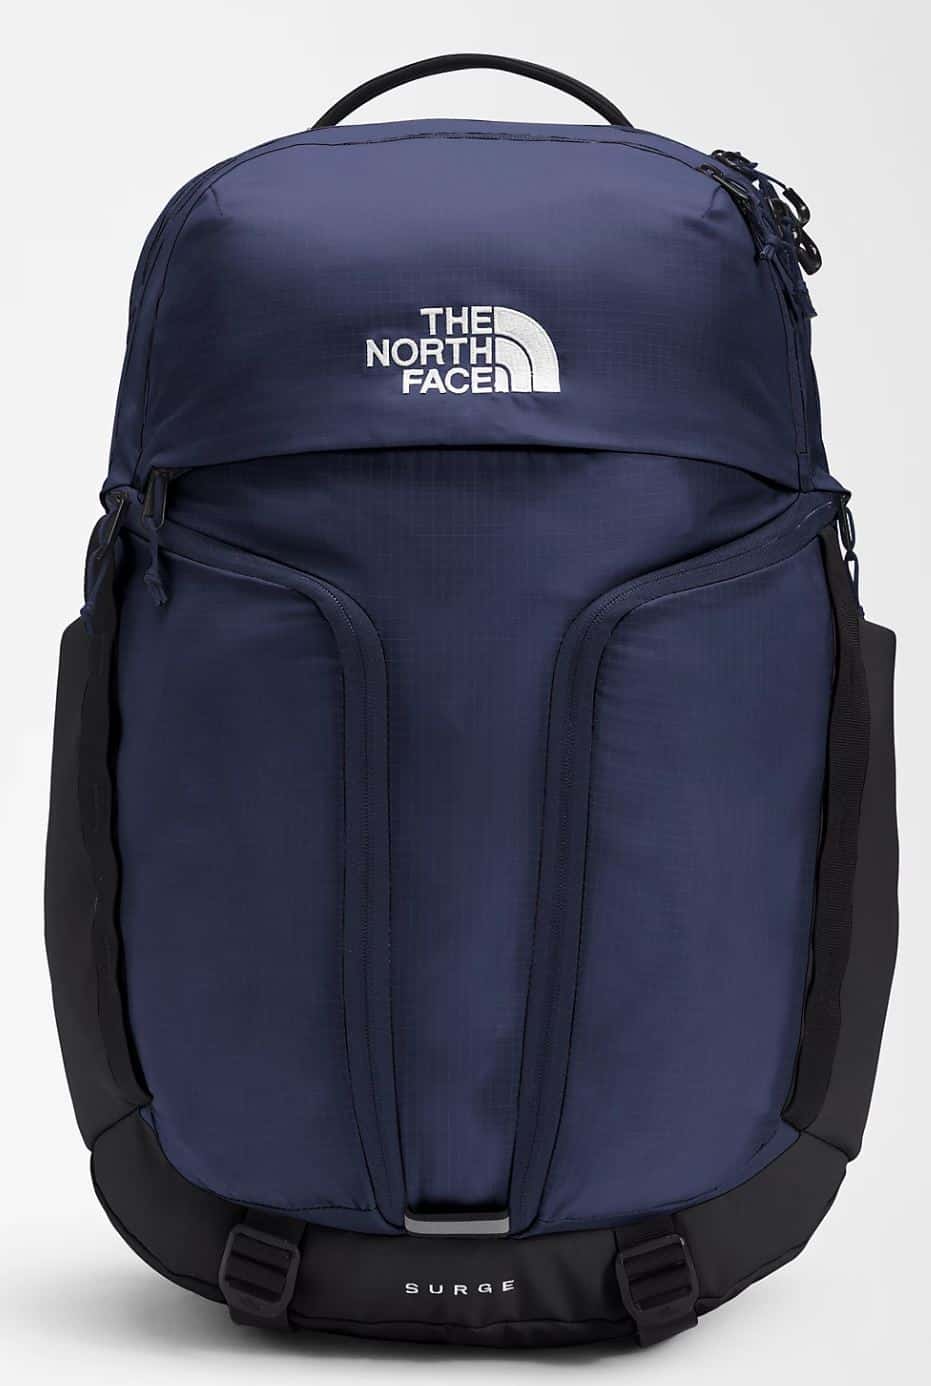 The North Face Surge Commuter Backpack